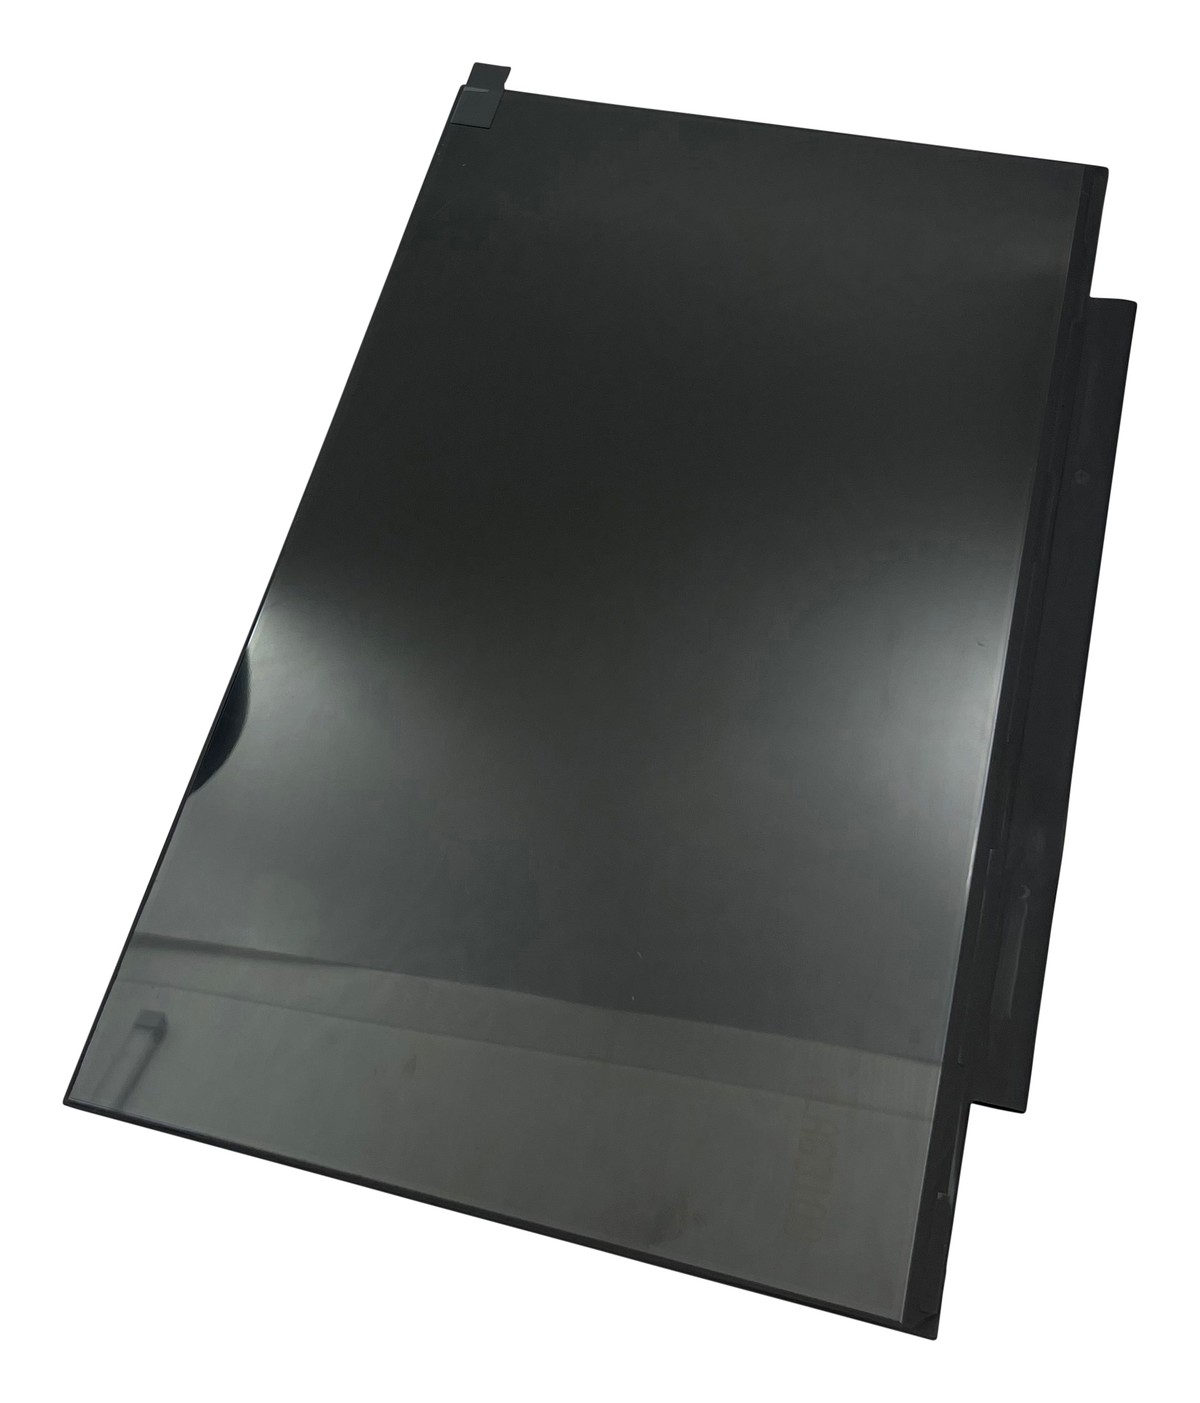 Replacement 14" FHD LCD Panel for the CTL NL81